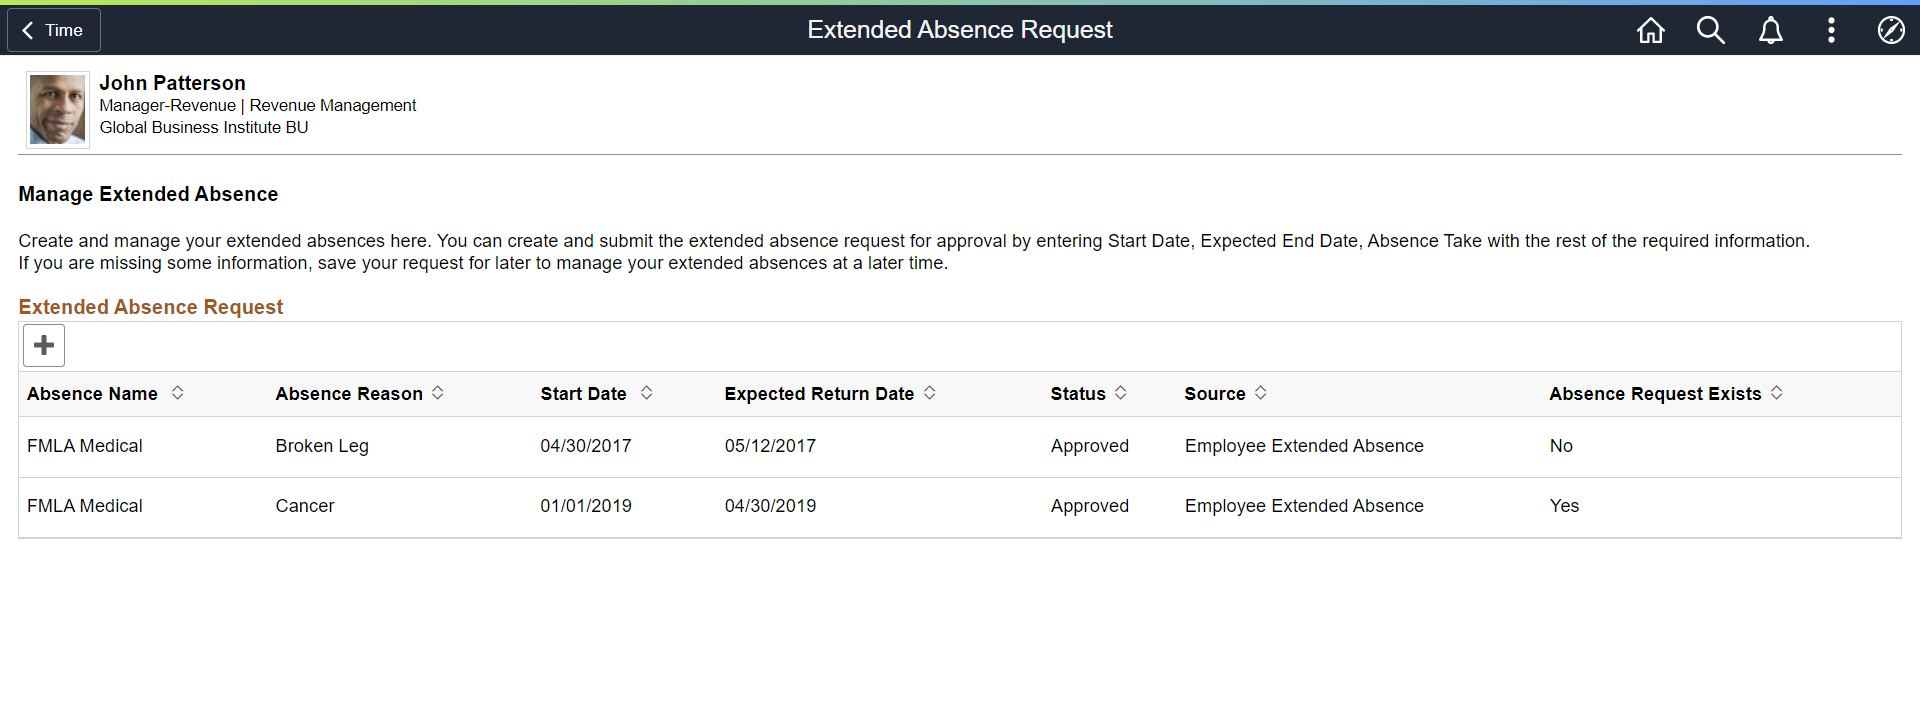 Extended Absence Request Page